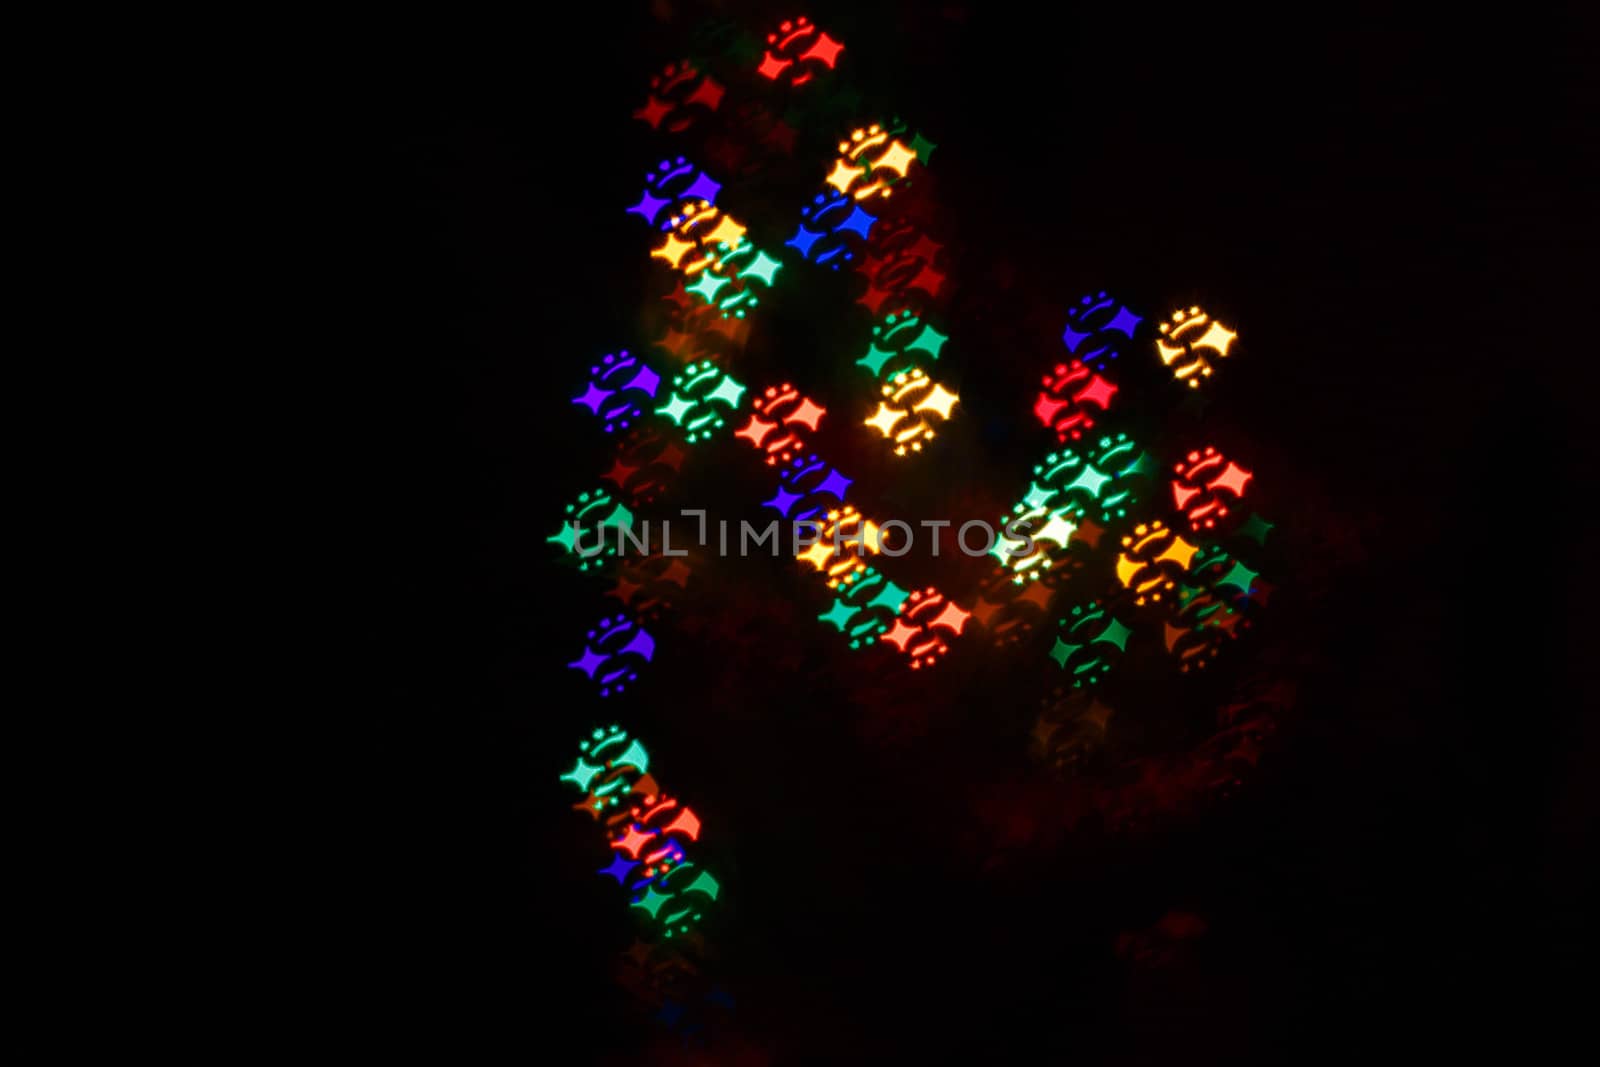 Multicolored abstract bokeh background close up shot for the holidays